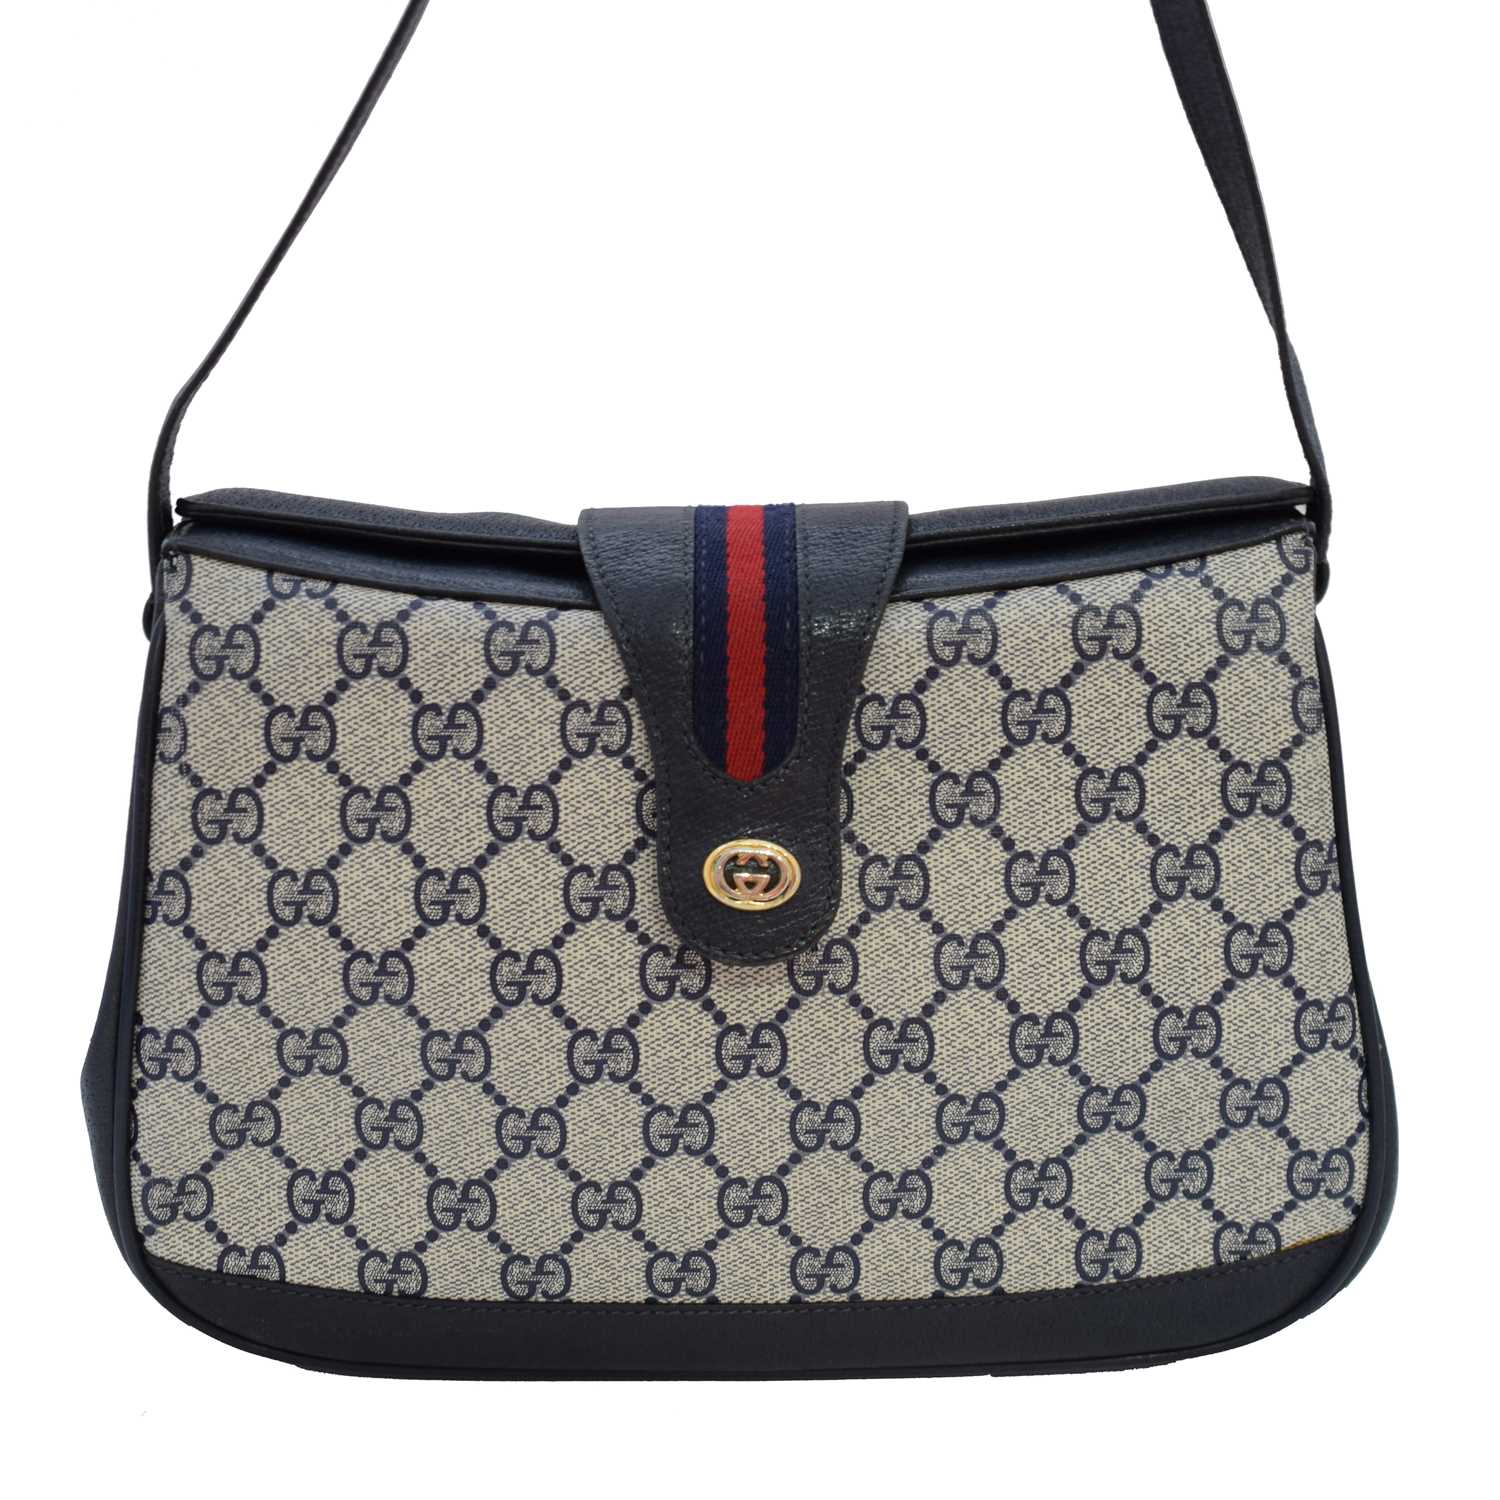 Vintage gucci accessory collection full line - itpilot